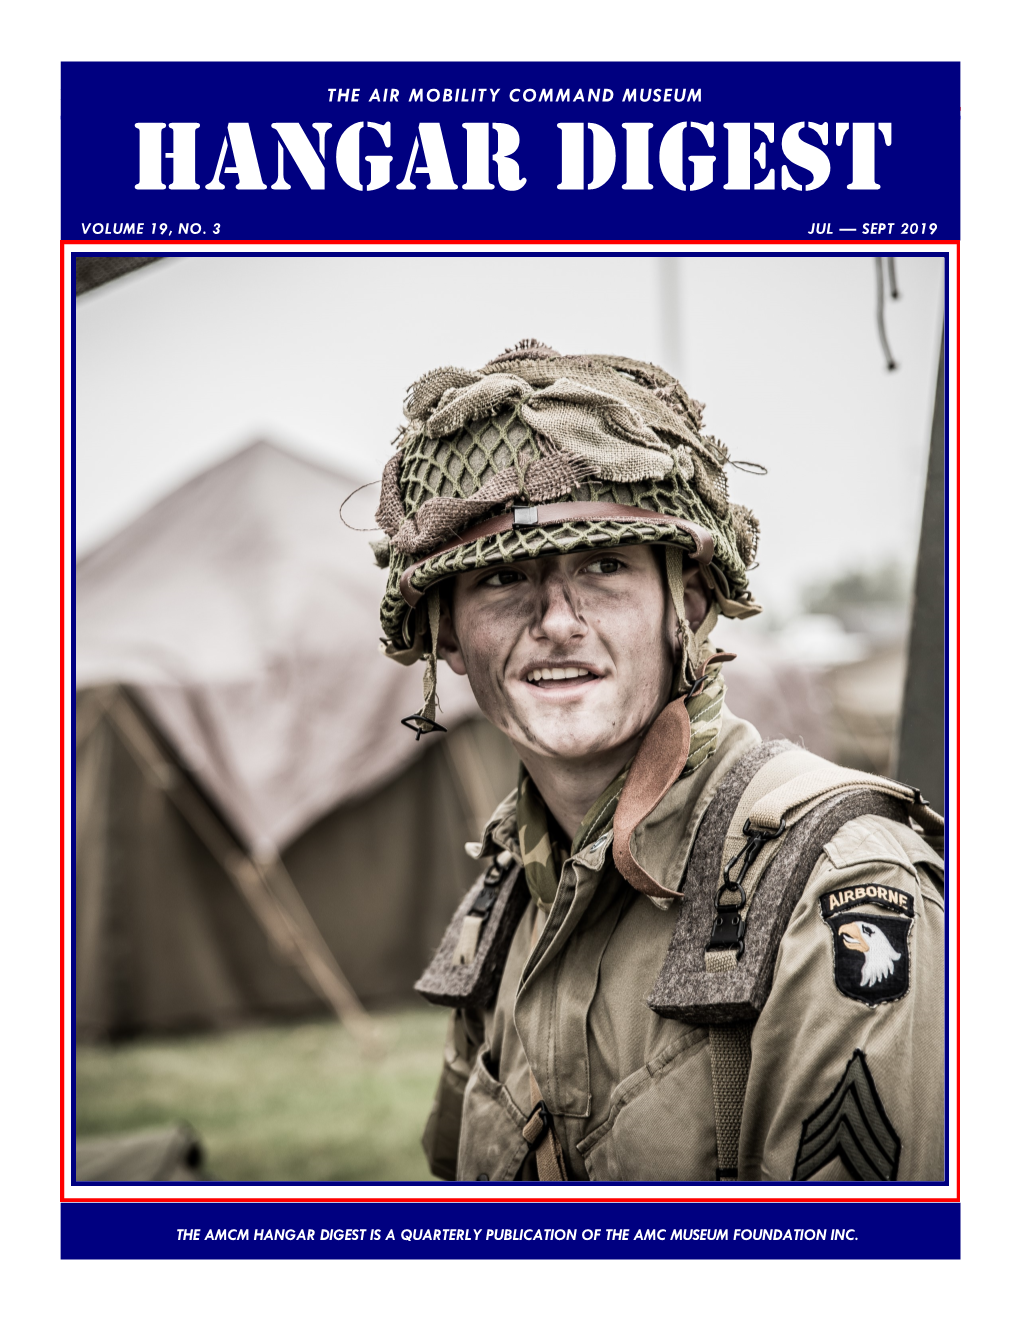 Hangar Digest the AIR MOBILITY COMMAND MUSEUM Page 1 Hangar Digest VOLUME 19, NO